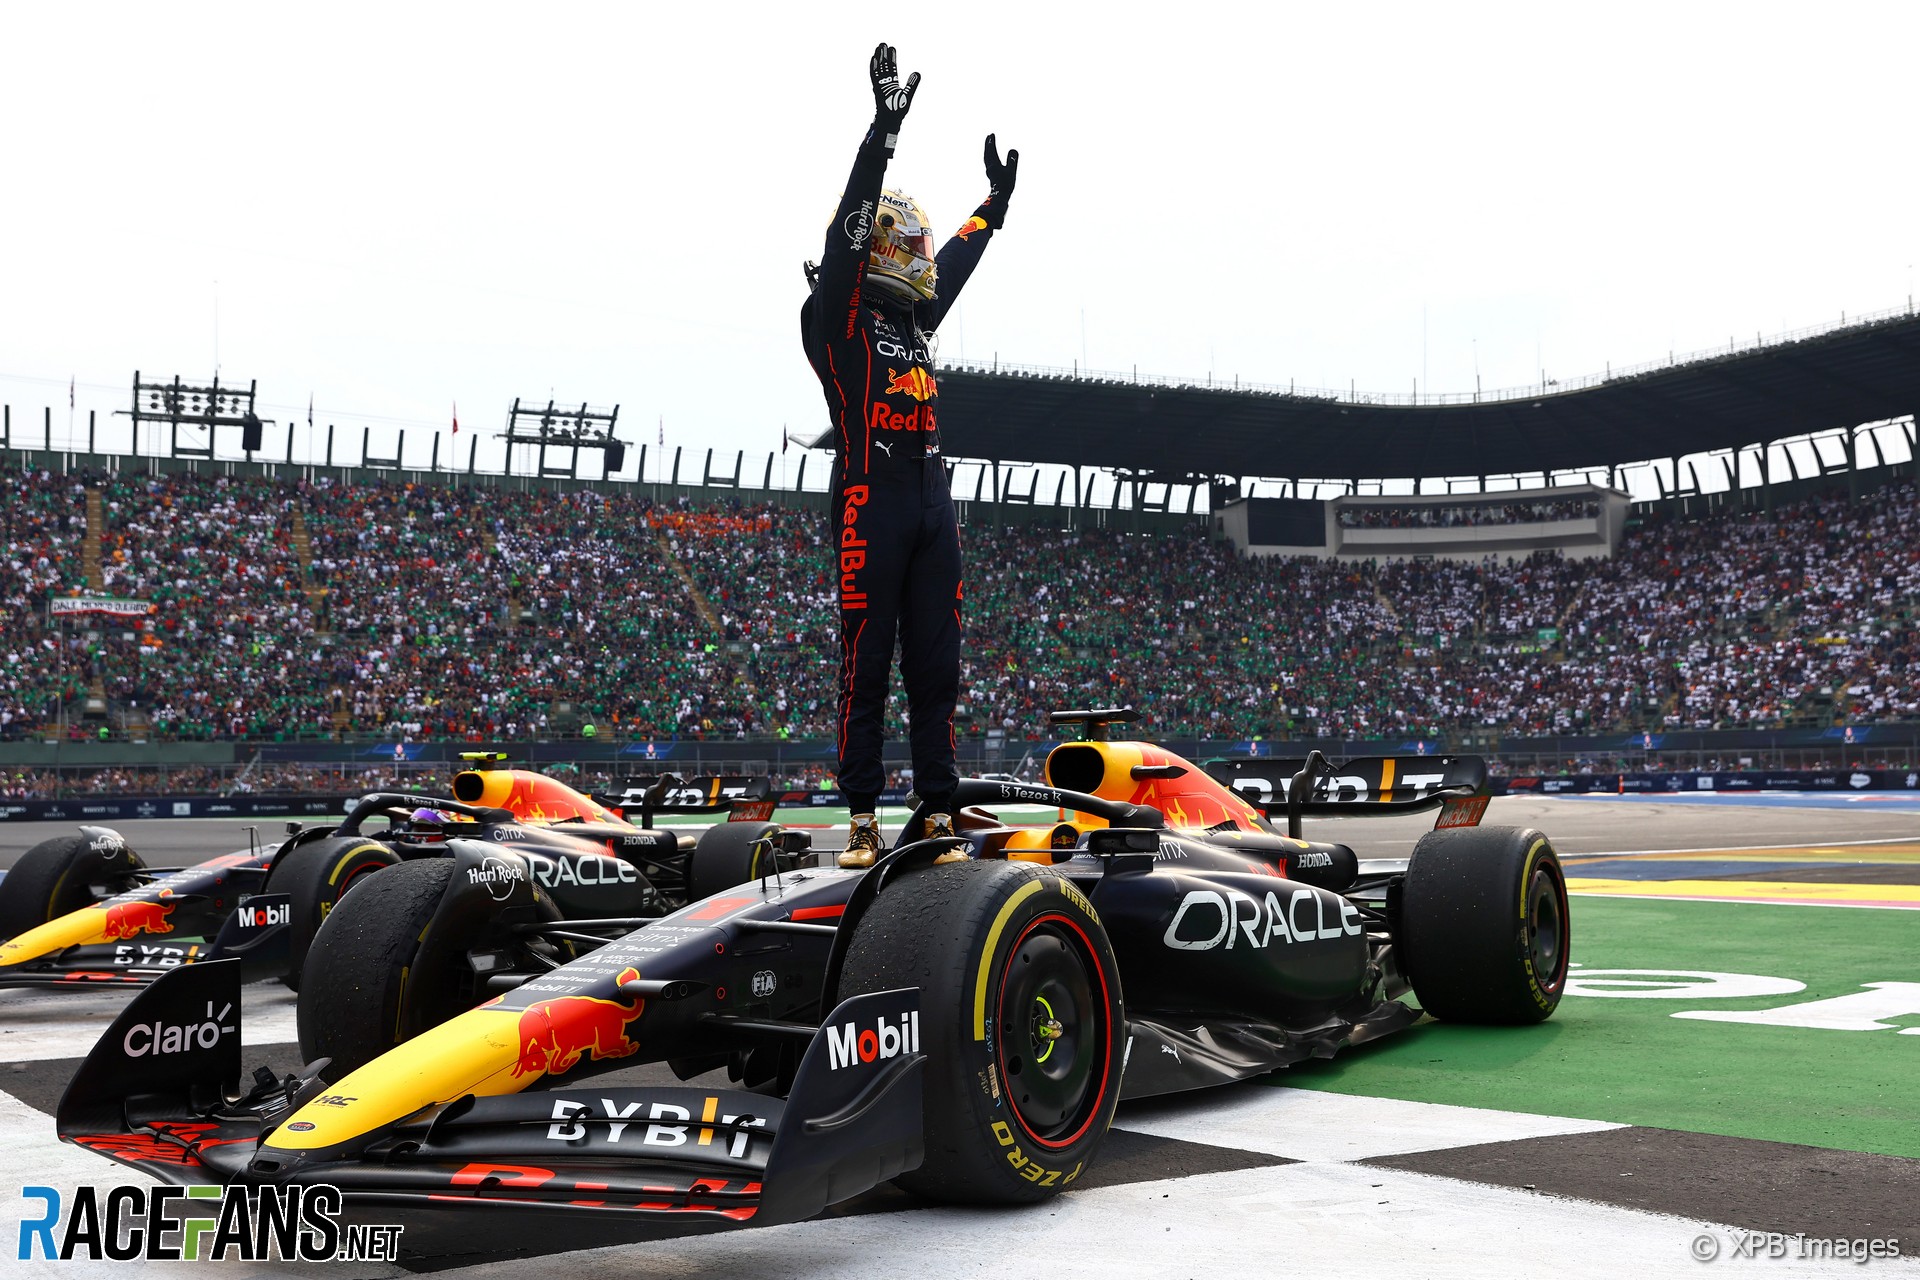 How Mercedes failed to make Verstappen fight for his record 14th win | 2022 Mexican Grand Prix review